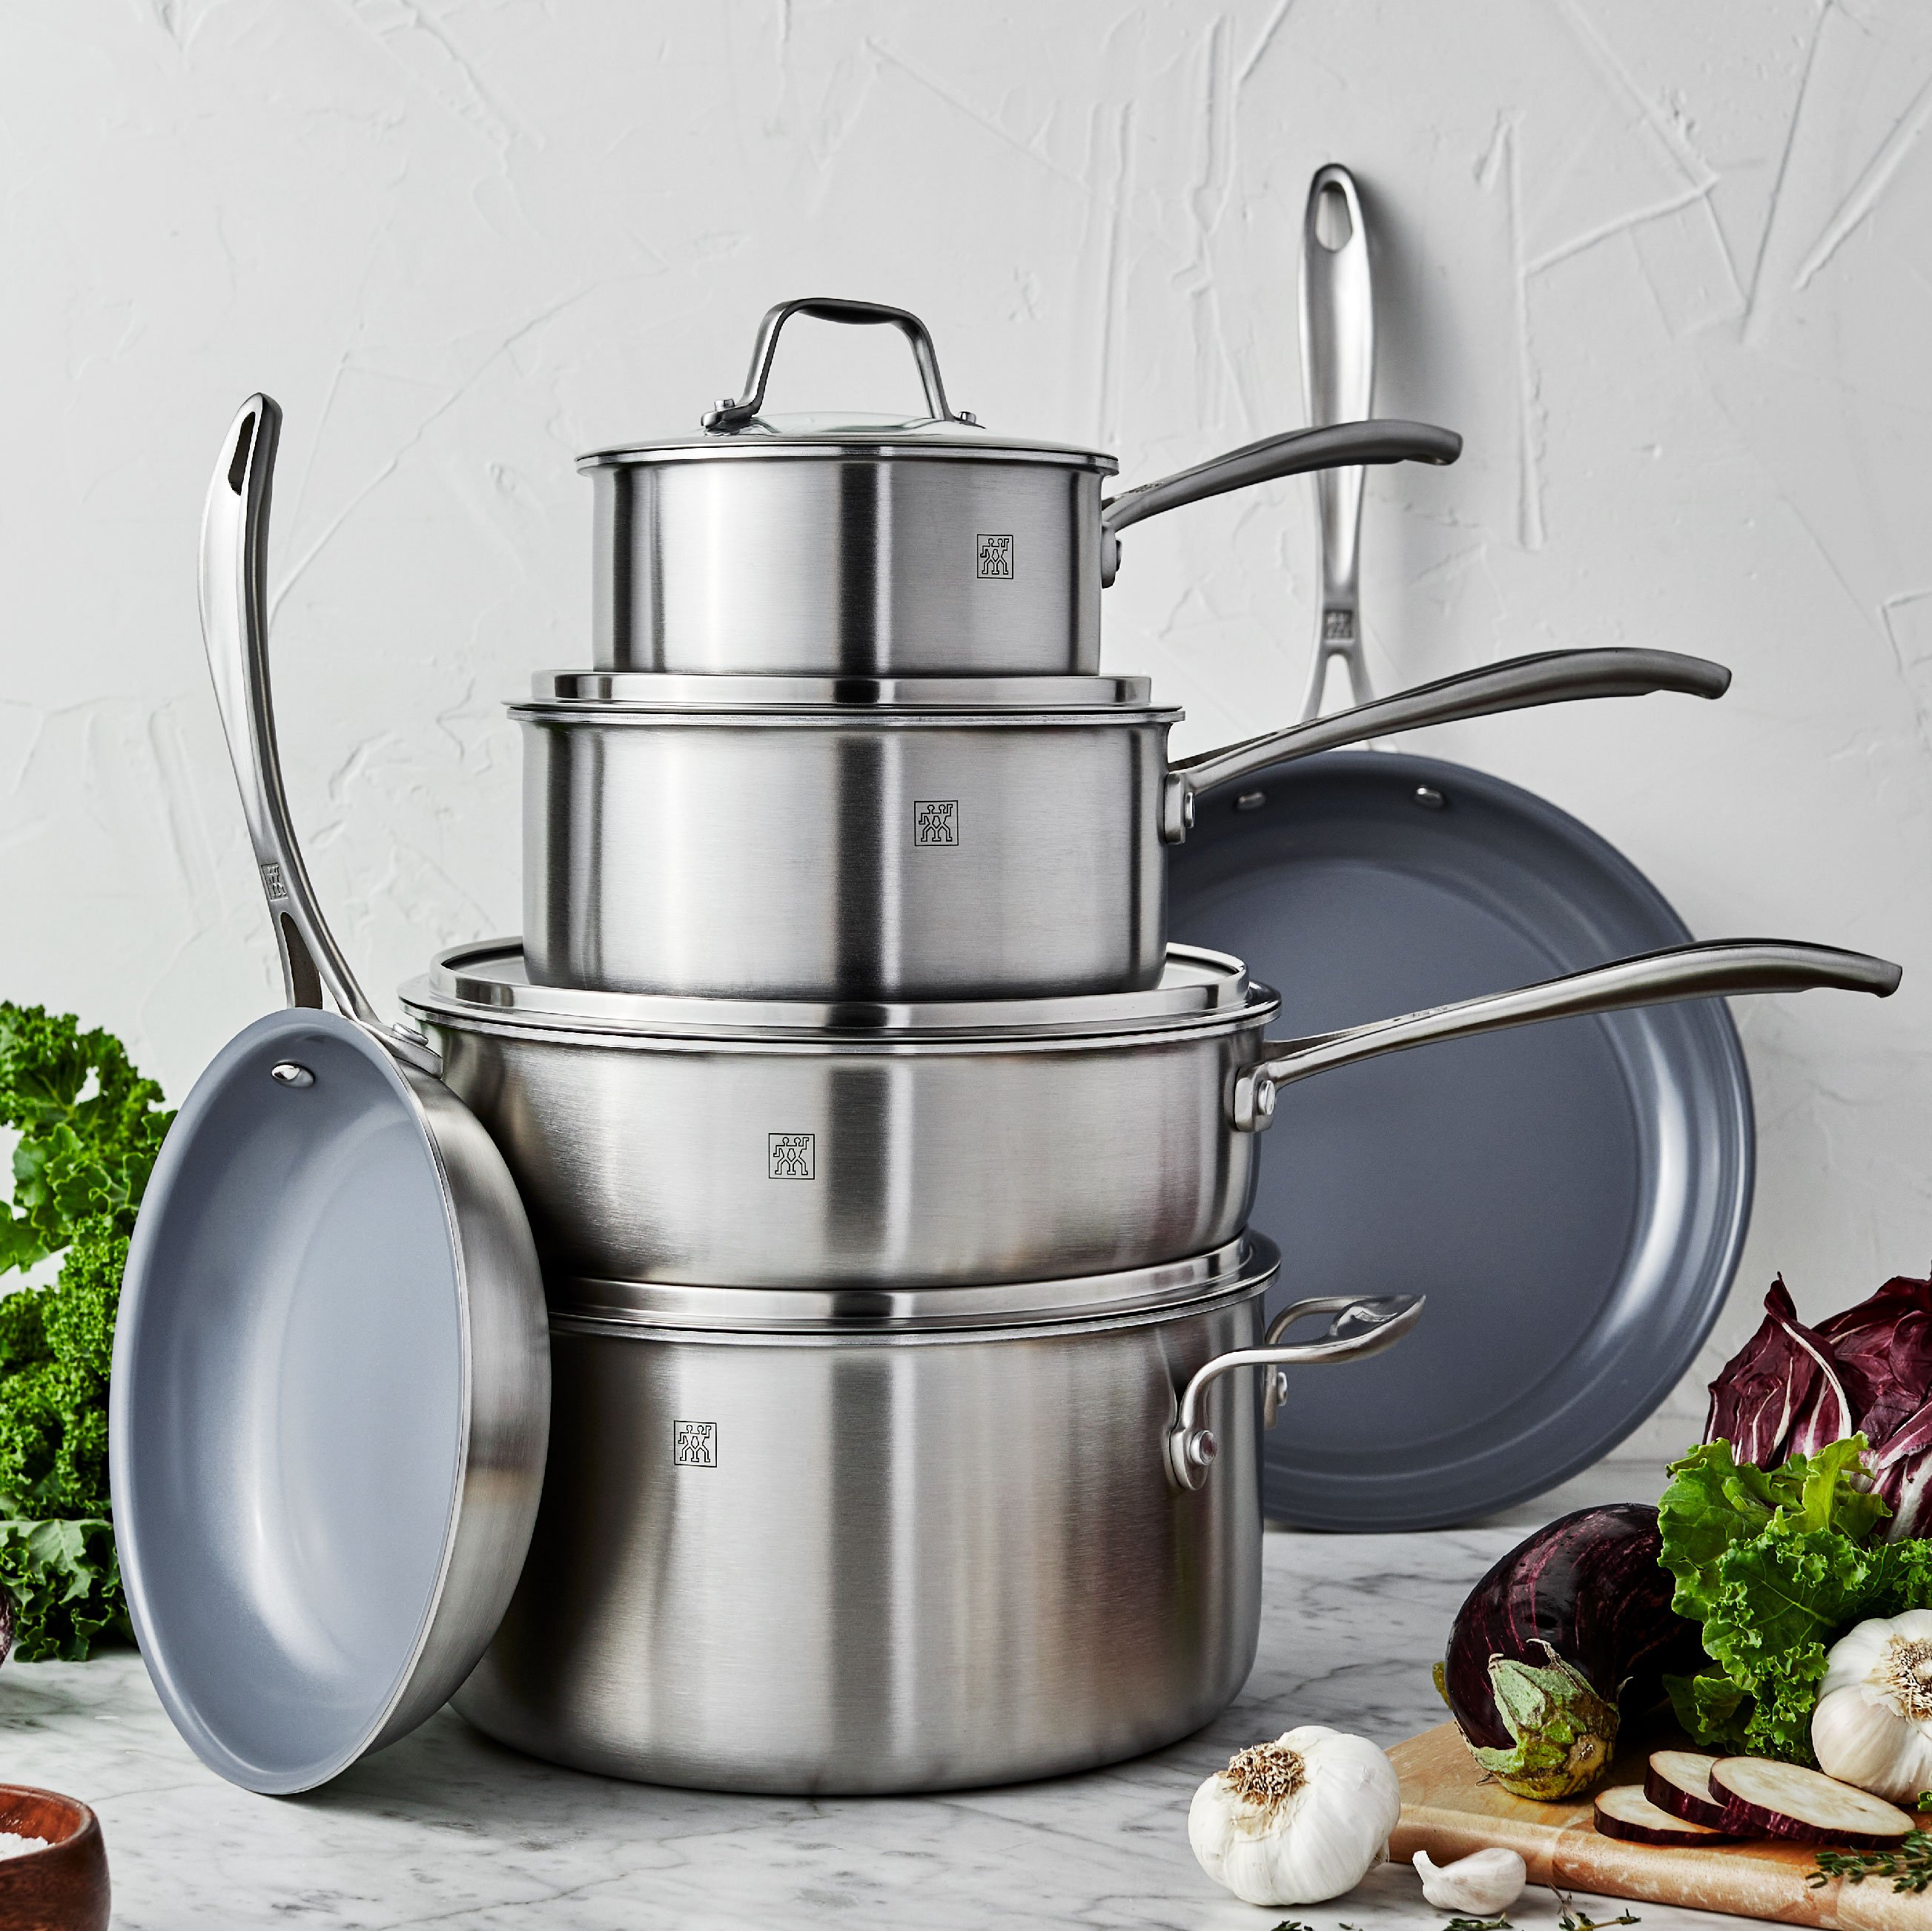 https://www.zwilling.com/on/demandware.static/-/Sites-zwilling-us-Library/default/dw19ffe846/images/product-content/masonry-content/zwilling/cookware/spirit/ZW_Spirit_Coated-07.jpg